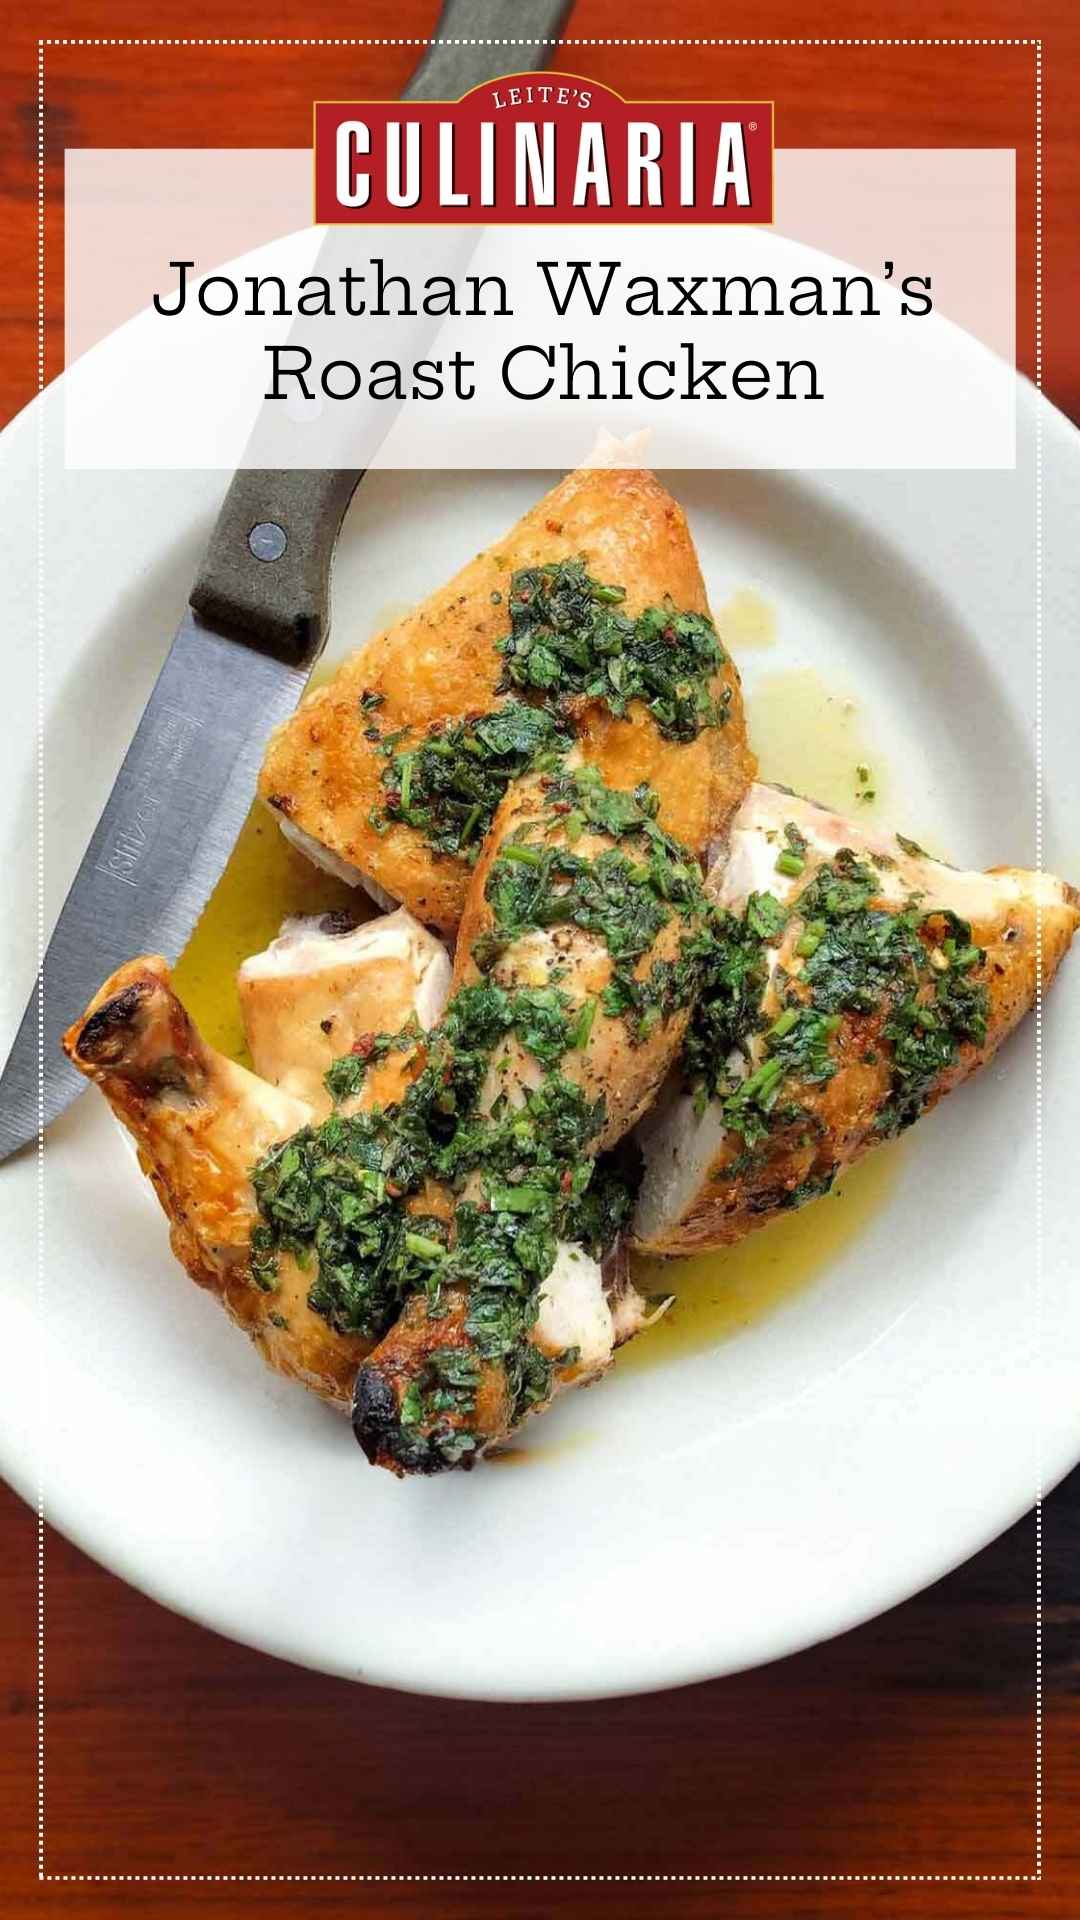 Pieces of roast chicken topped with salsa verde on a white plate, with a knife resting on the side.